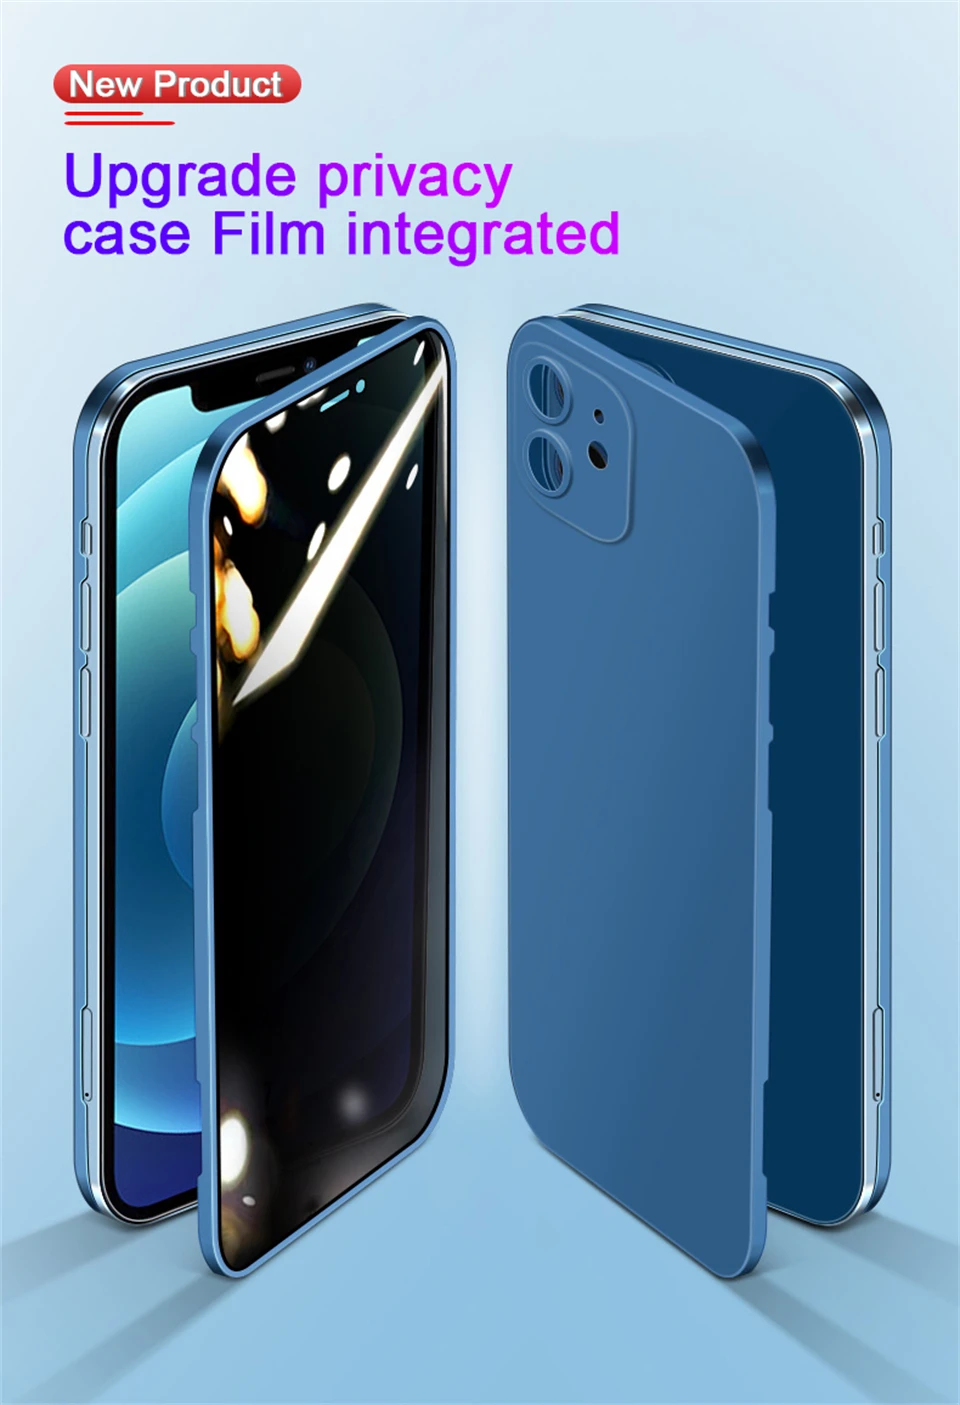 iphone 12 case 360 Full Cover Protection Case For iPhone 12 13 Pro Max Privacy Screen Protector 12 13 Mini Tempered Glass Camara Lens Protector clear iphone 12 case